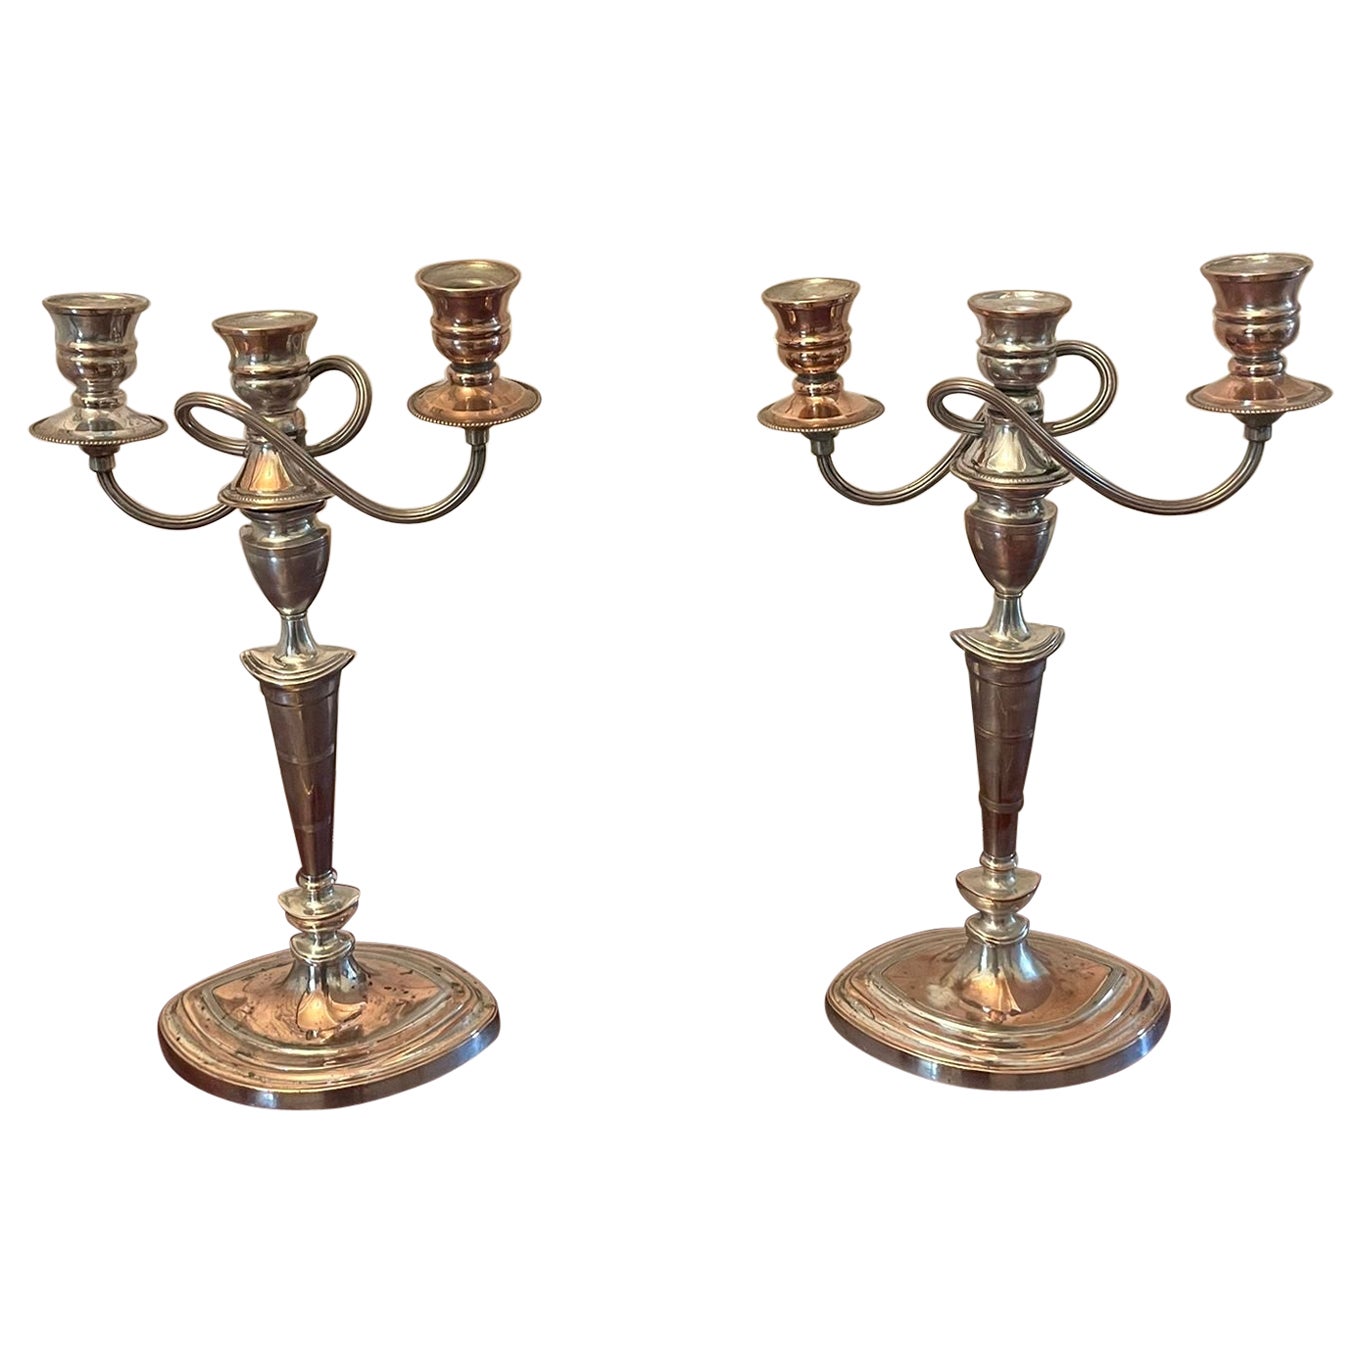  Pair of Antique Victorian Quality Sheffield Plated Candelabras 